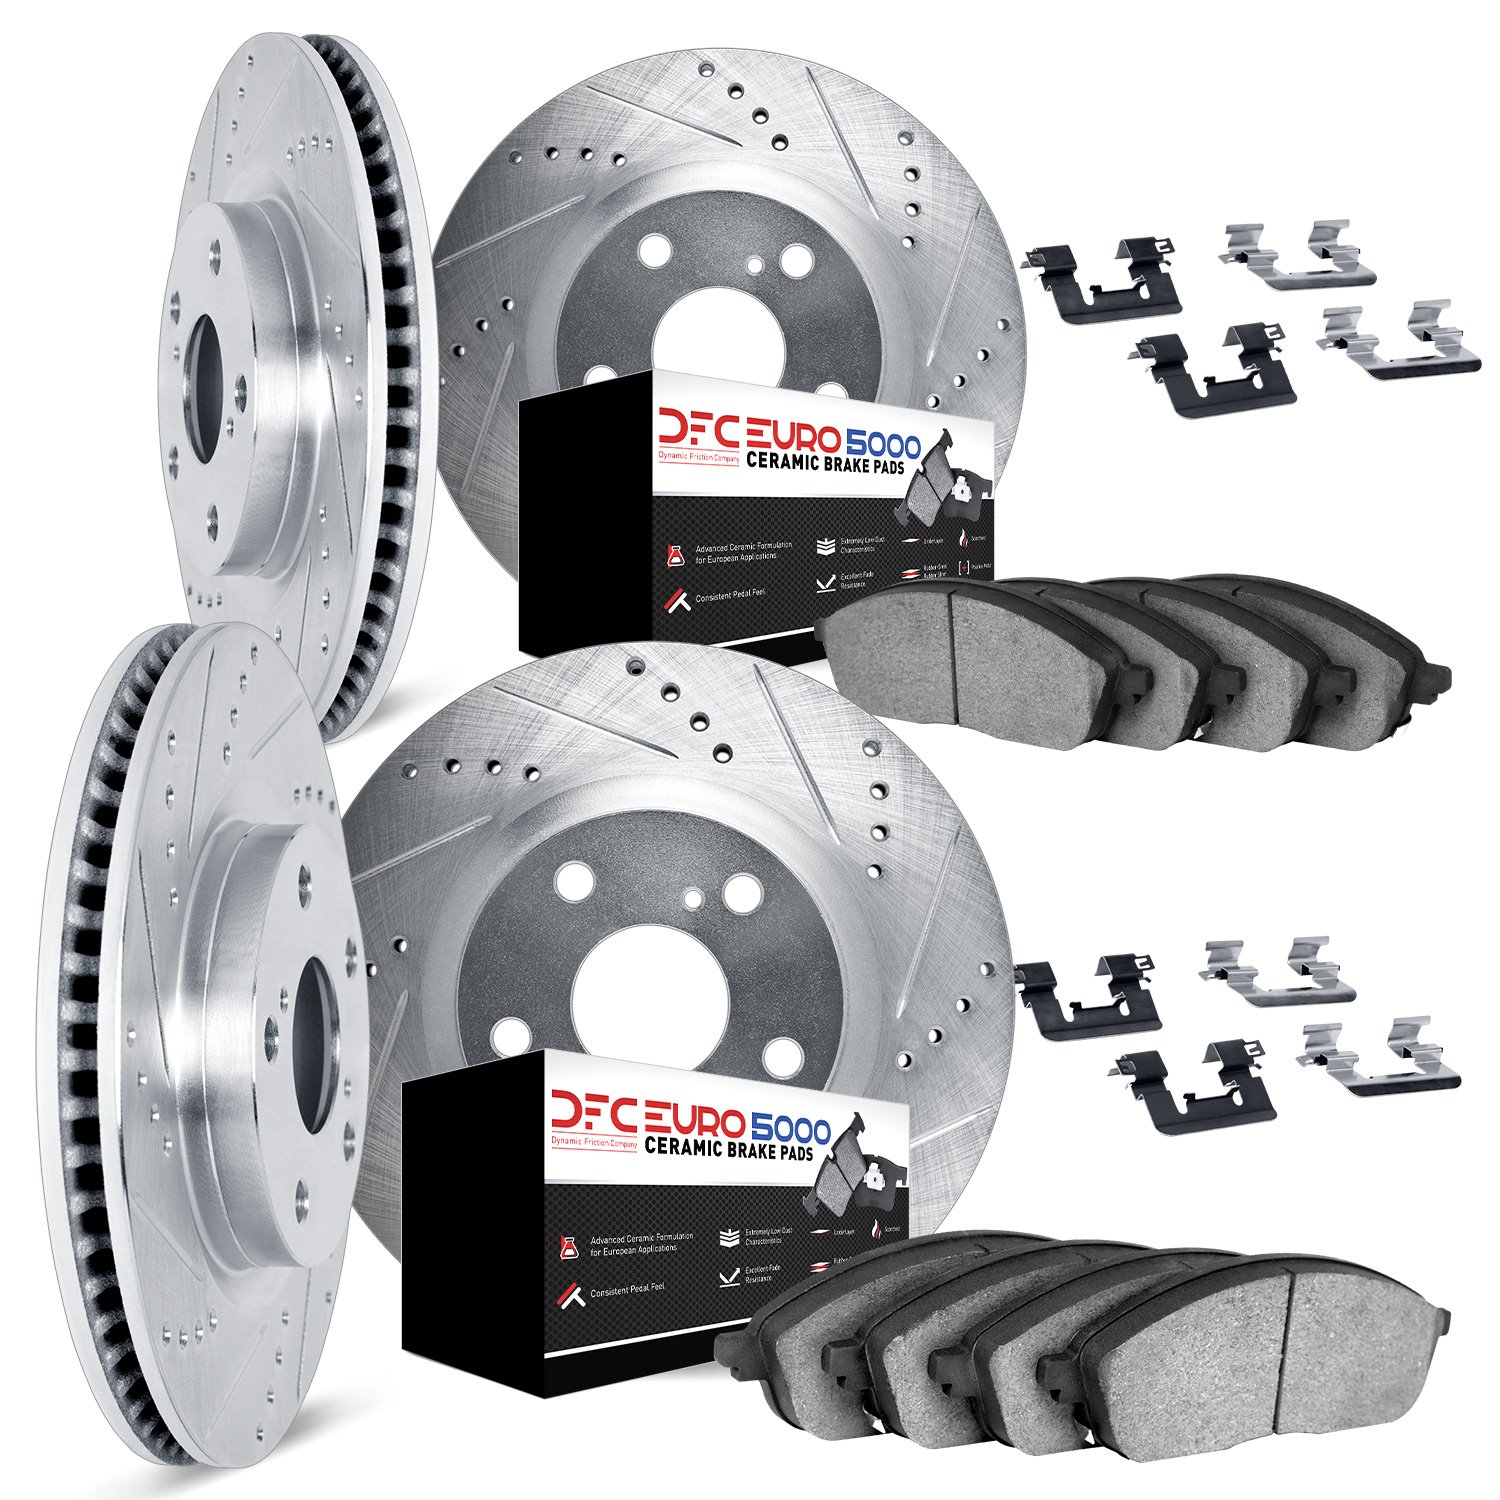 7614-31039 Drilled/Slotted Brake Rotors w/5000 Euro Ceramic Brake Pads Kit & Hardware [Silver], Fits Select BMW, Position: Front